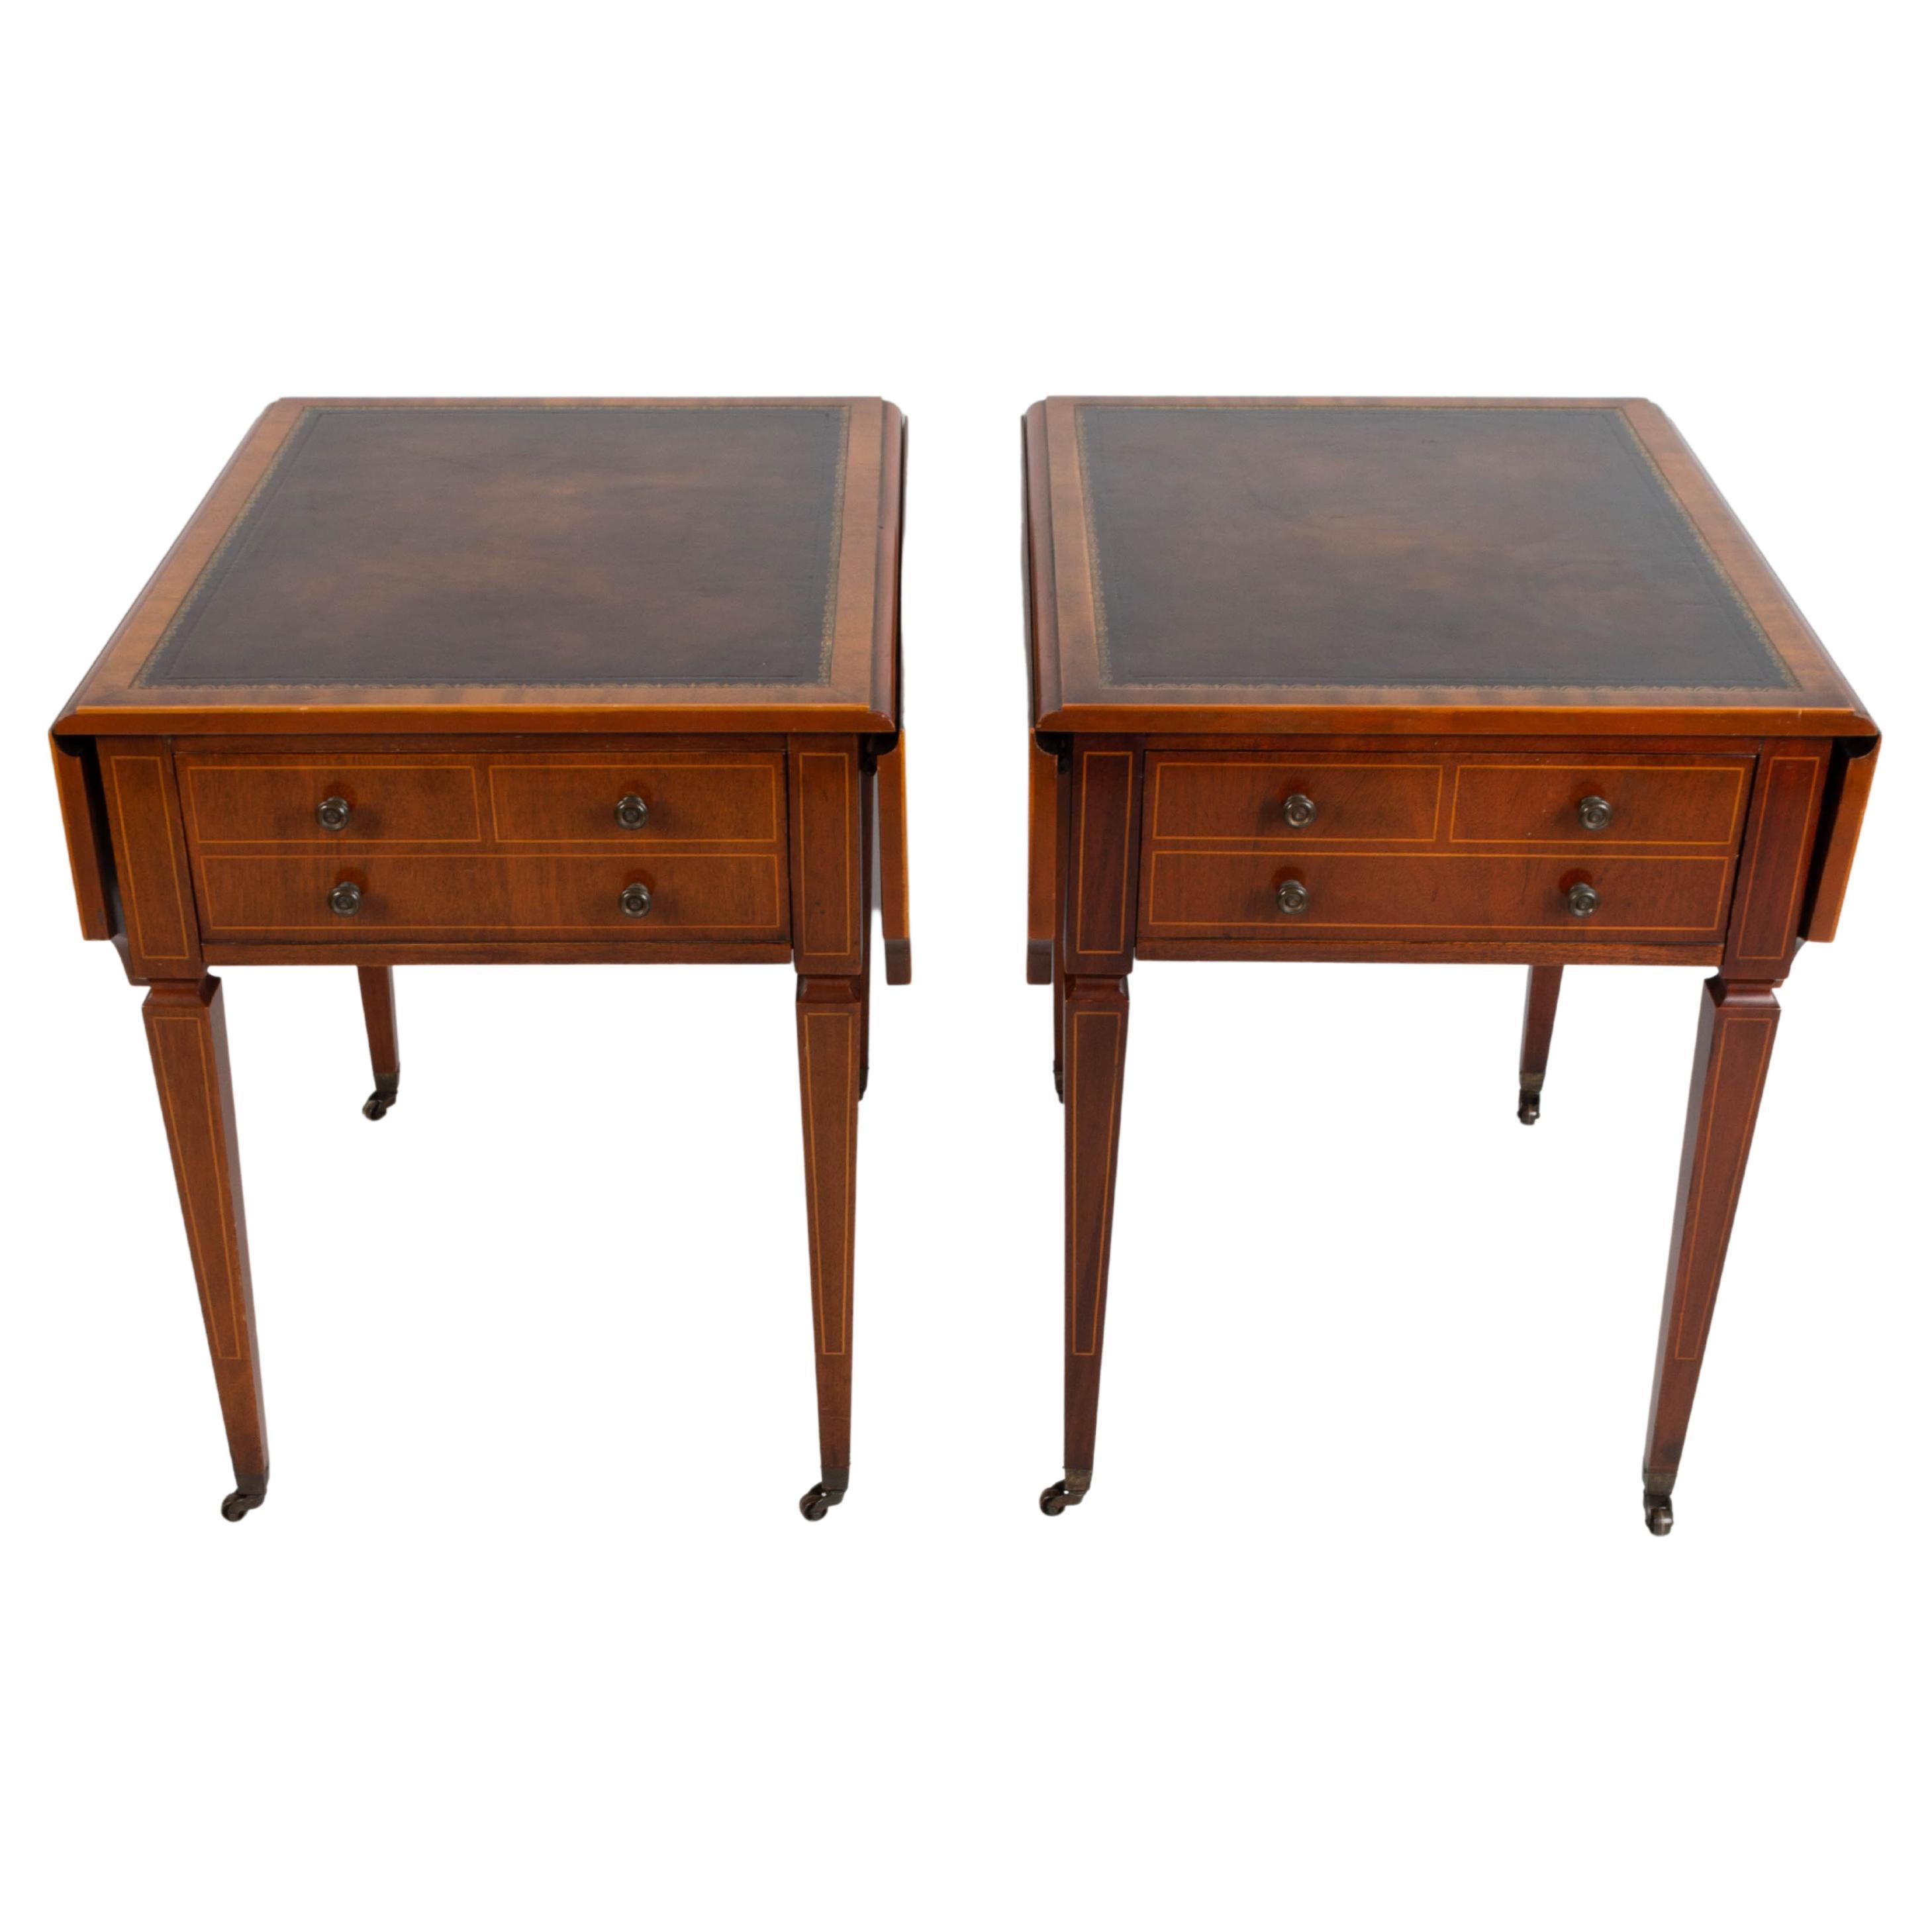 Pair English Georgian 18th Century Revival Leather Inset Drop Leaf Sofa Tables For Sale